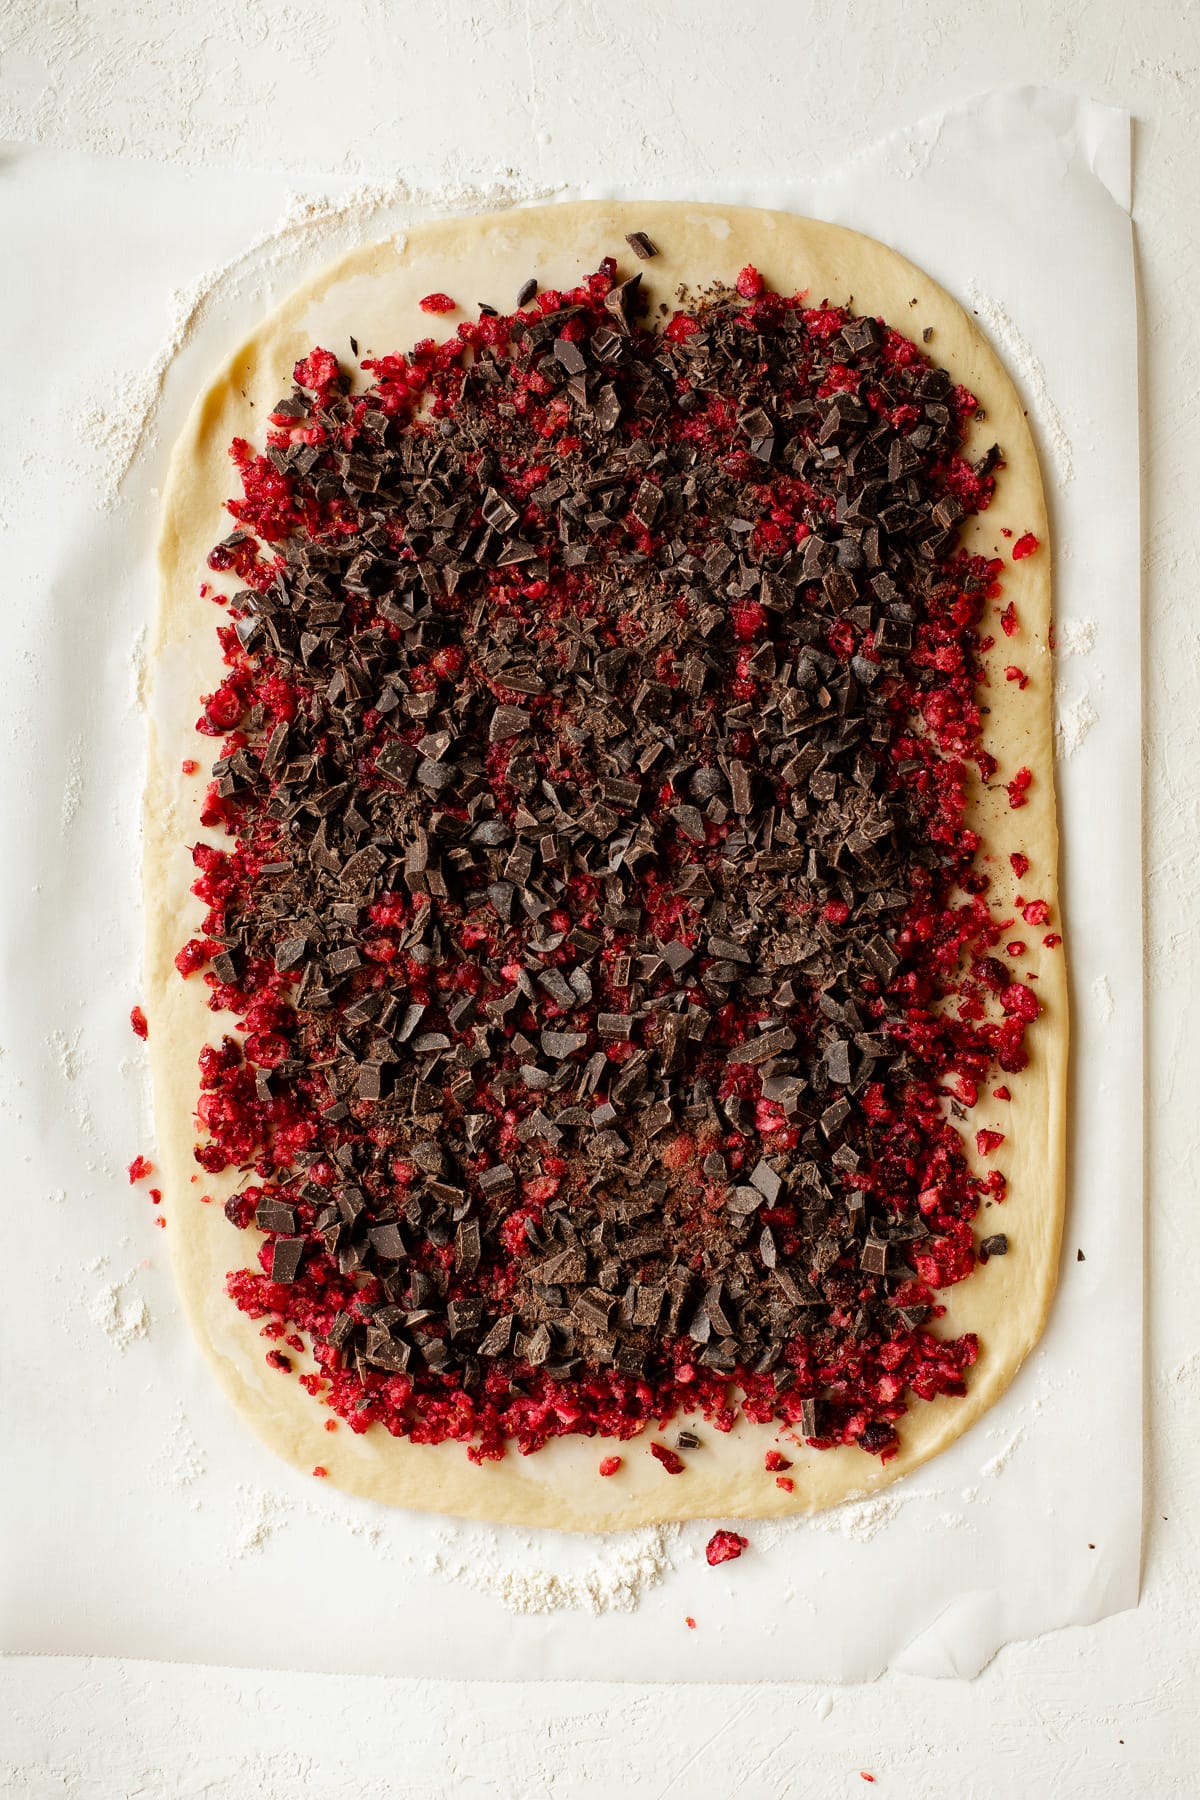 Brioche dough rolled out and topped with a cranberry-chocolate mixture.